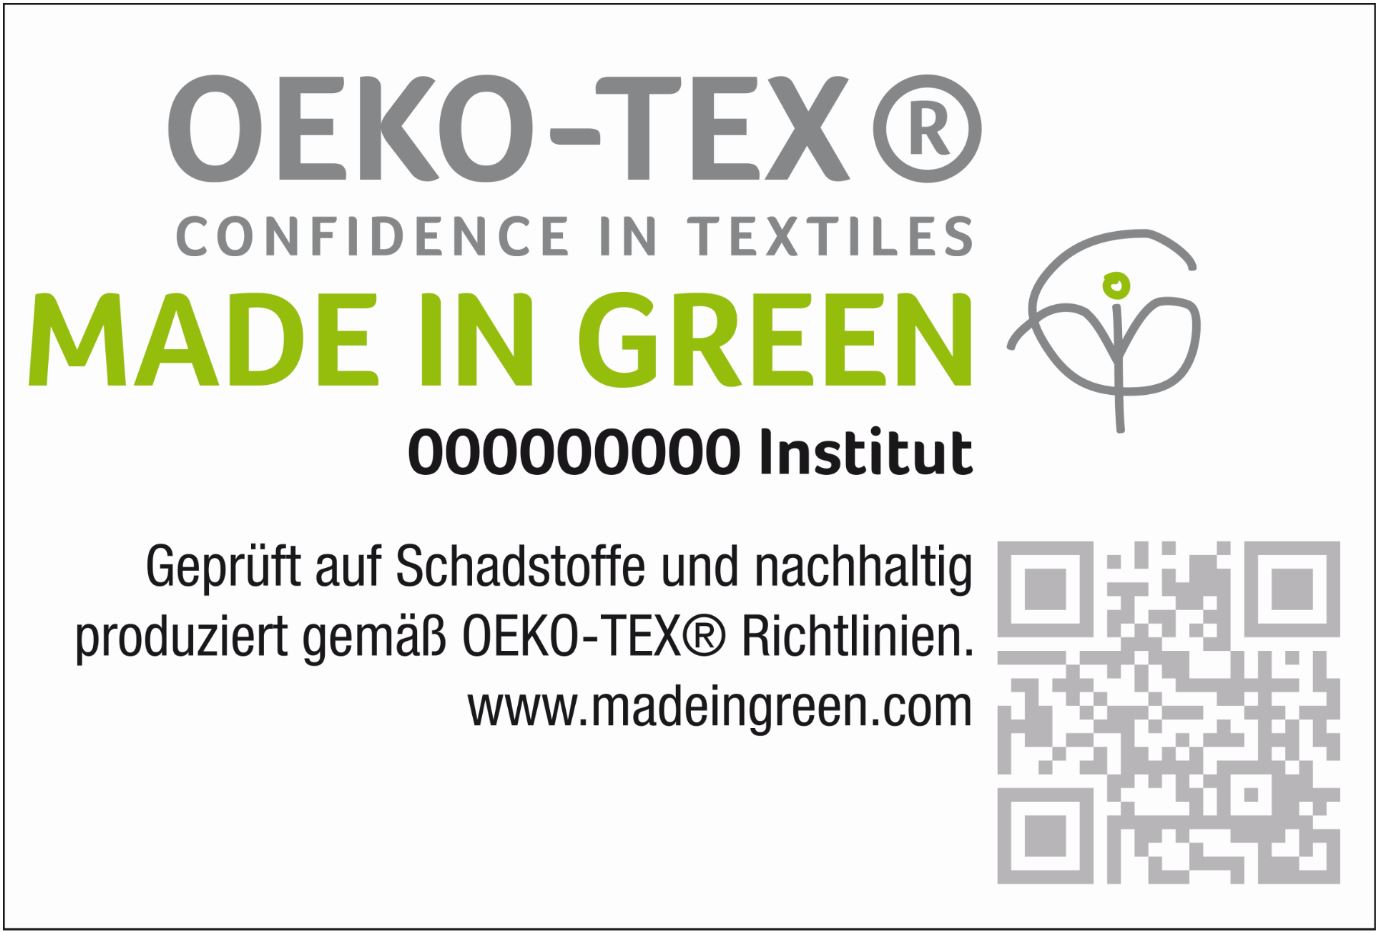 Made in Green by Oeko-Tex: transparency in the QR Code